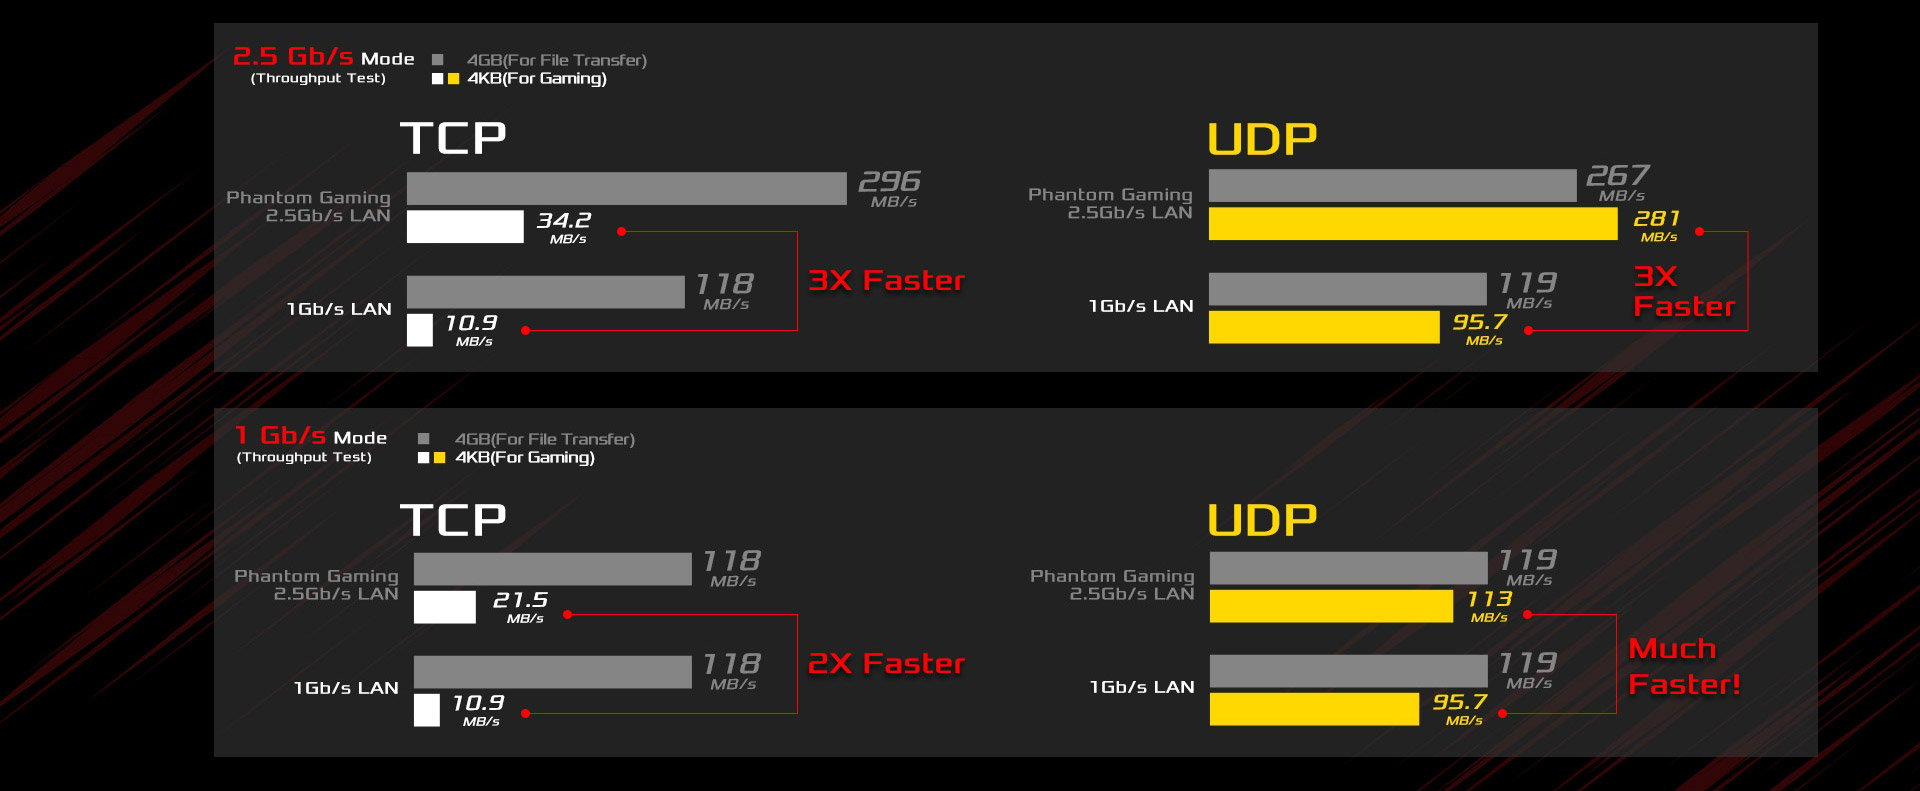 Bar Graphs showing the different between 2.5Gbps versus 1Gbps TCP versus UDP